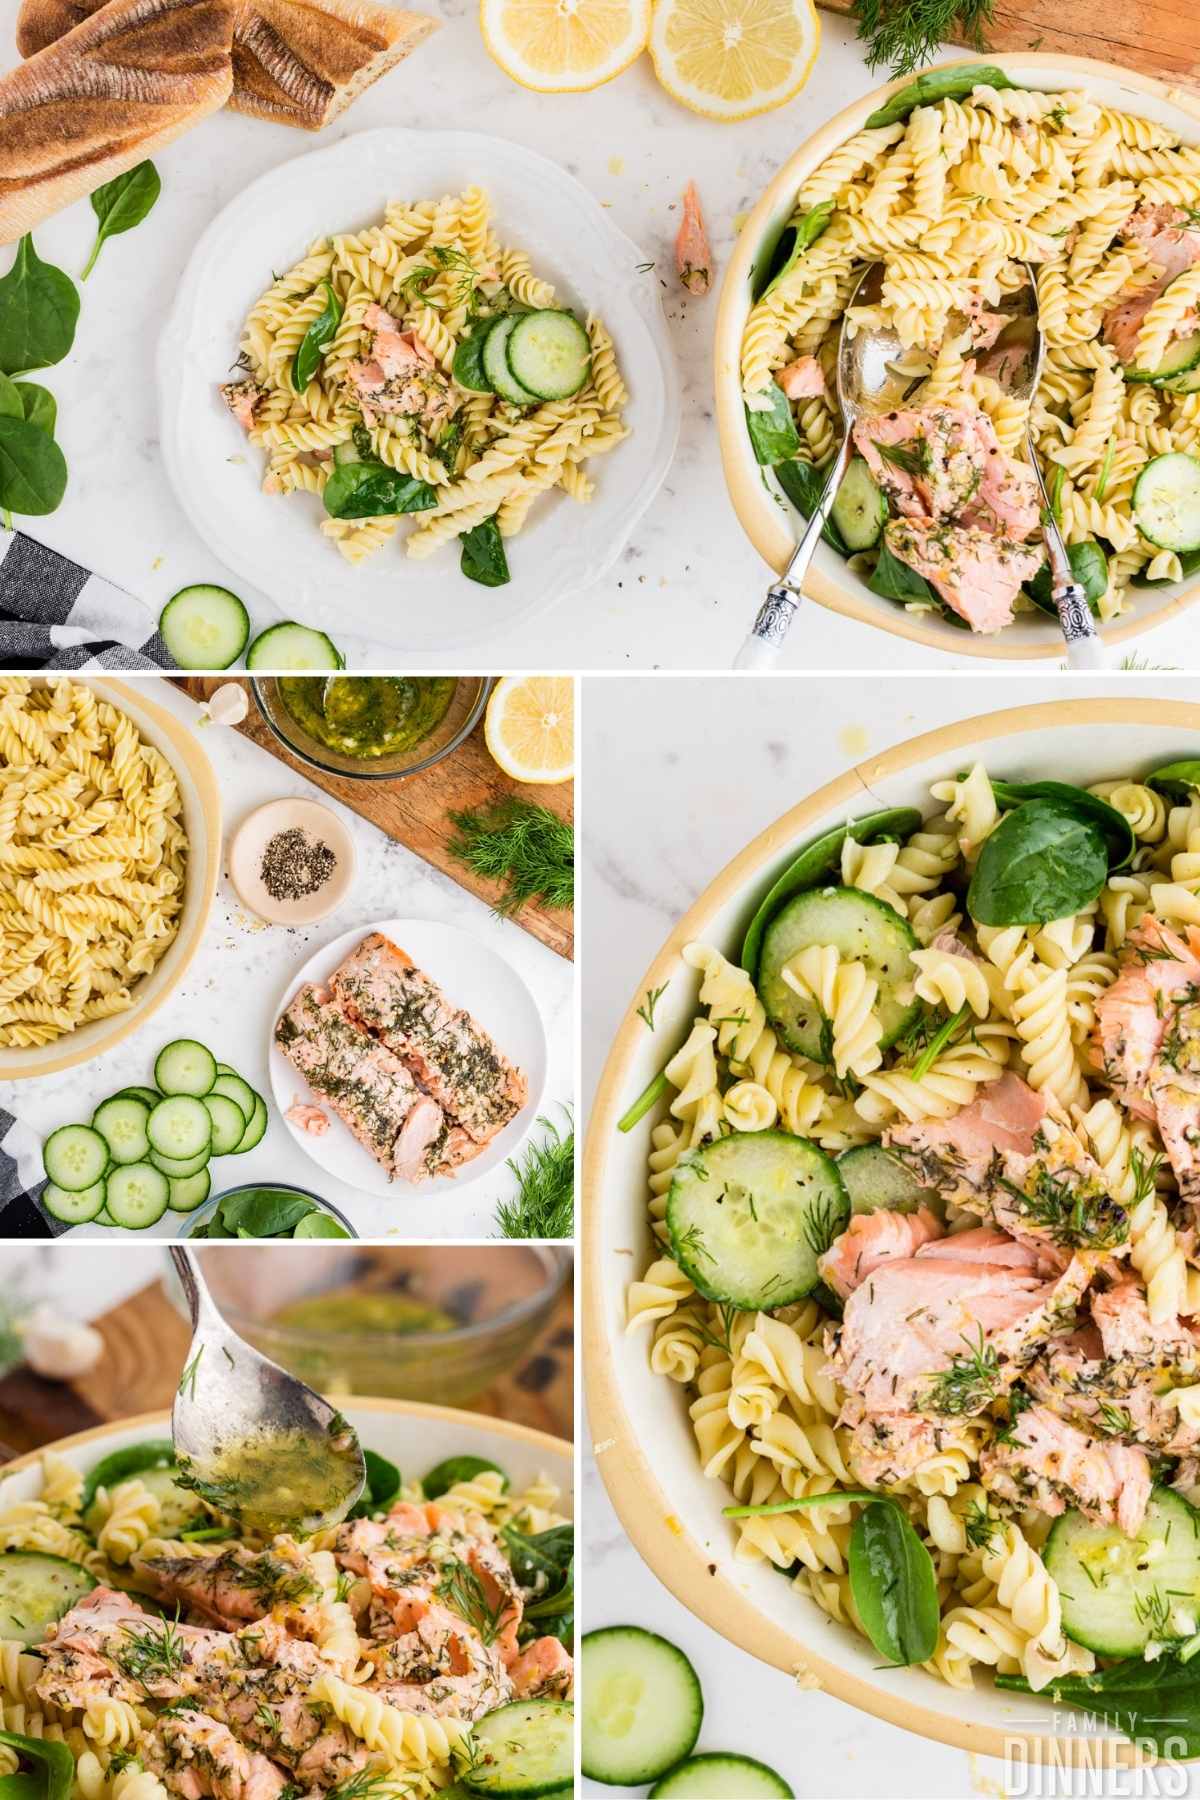 two image collage. Top image of large bowl of mixed salmon pasta salad with cucumber salad and spinach next to a small plate with cold pasta salad on it. Next image of salmon leftovers with salmon pasta spinach and cucumbers ready to be tossed. Next image of cold pasta salad dressing drizzled on top of bowl of pasta dish.